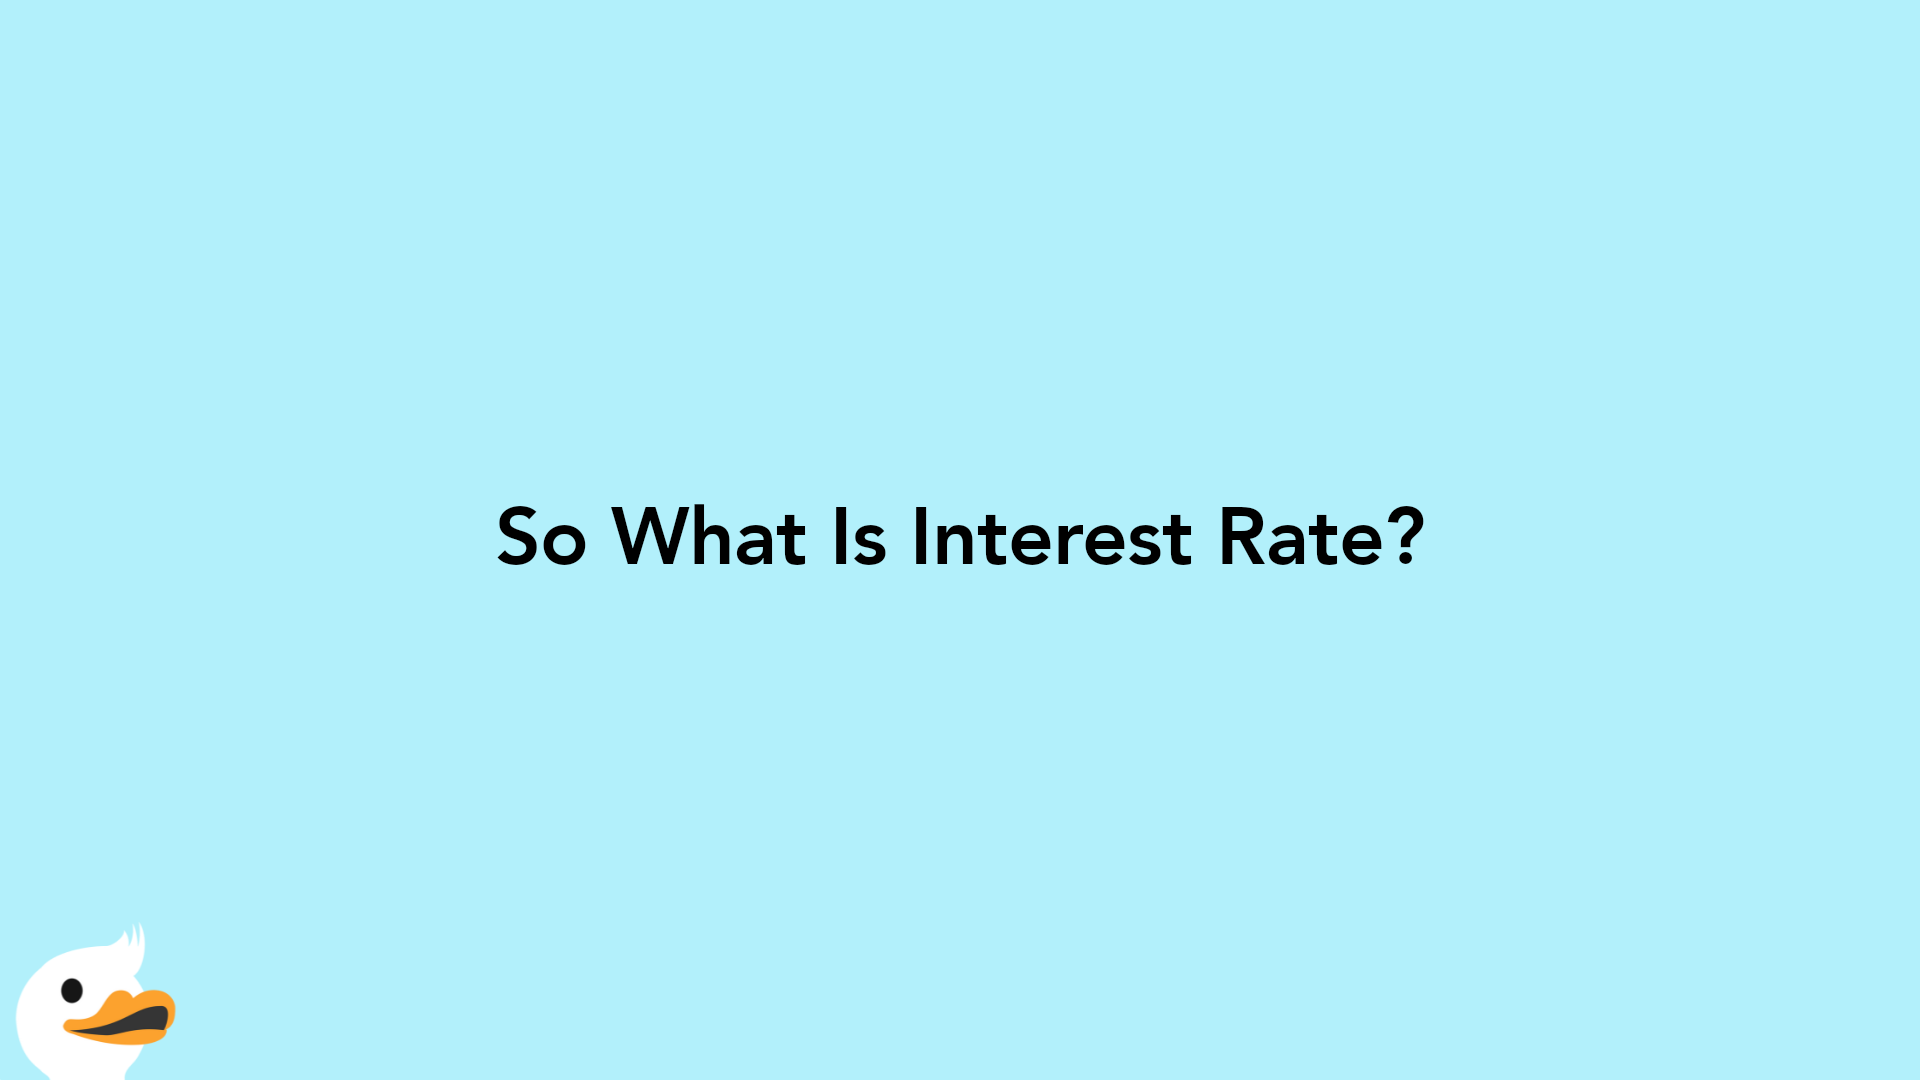 So What Is Interest Rate?